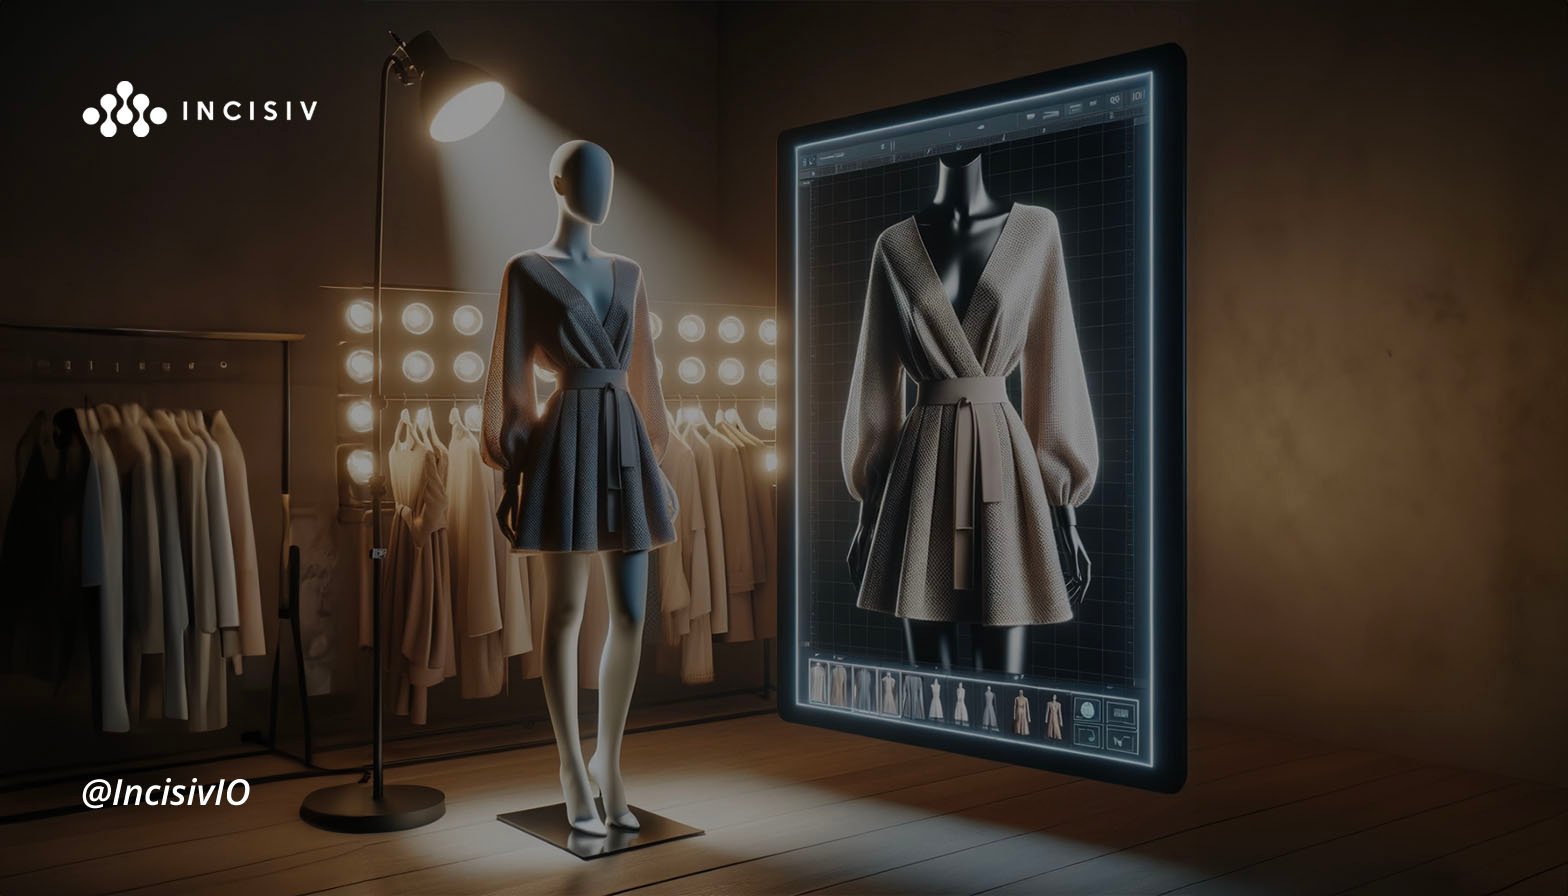 Digital Twins and Sustainability - The Future of Fashion and Apparel Industry